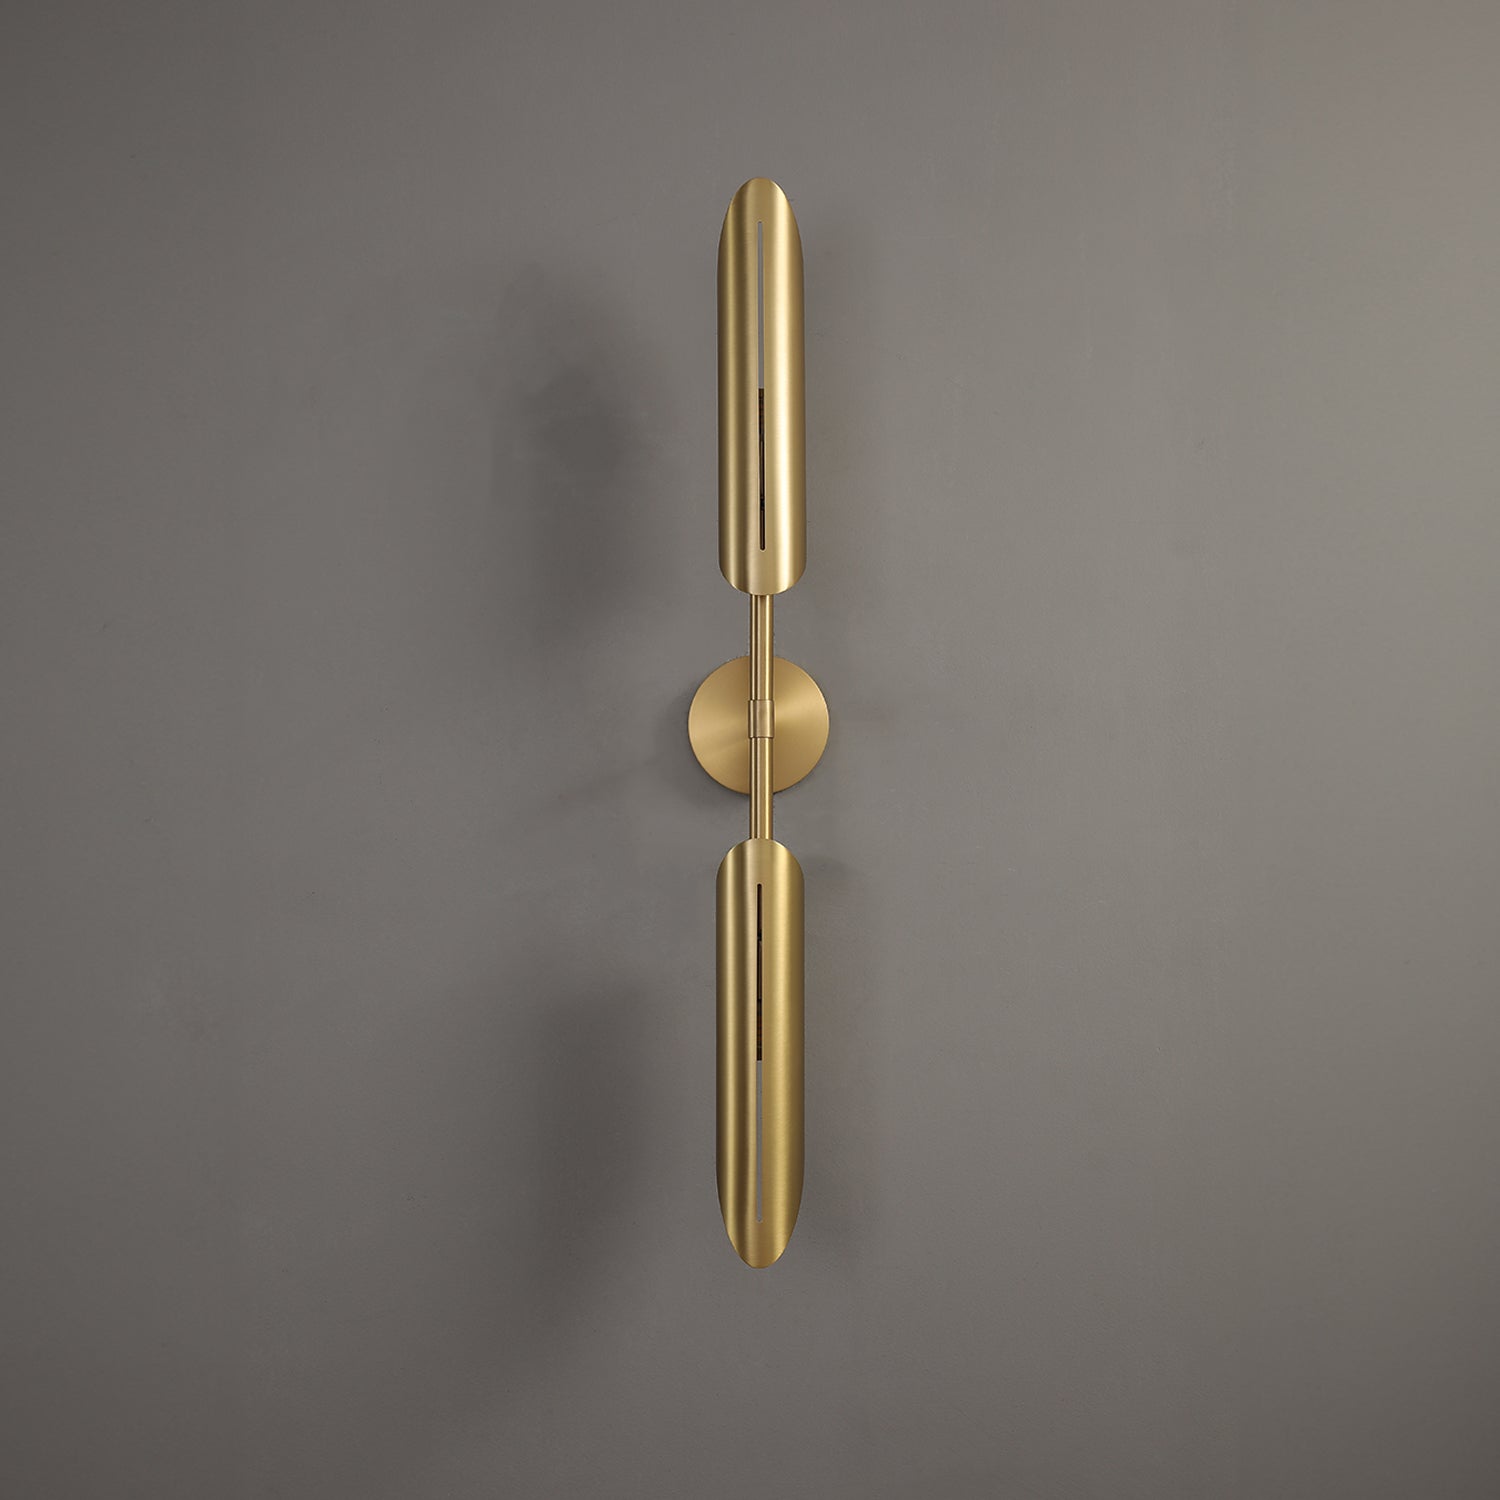 Voyager_Dual_Sconce_AlliedMaker_0008